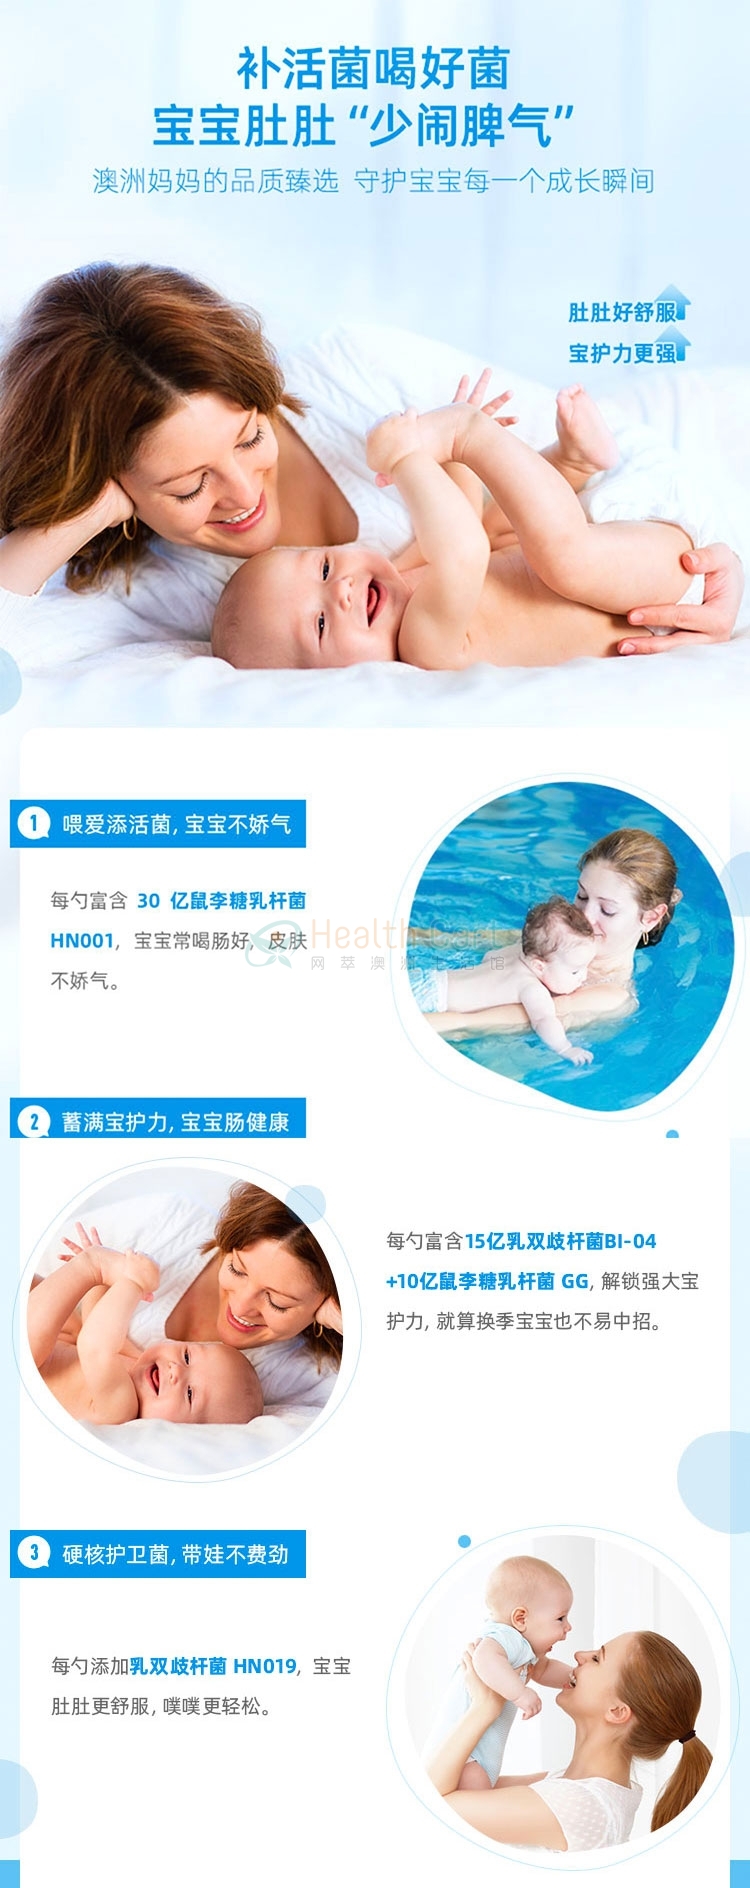 Life Space婴儿益生菌粉（0-3岁）60g - @life space probiotic powder for baby0 3years 60g - 7 - Healthcart 网萃澳洲生活馆